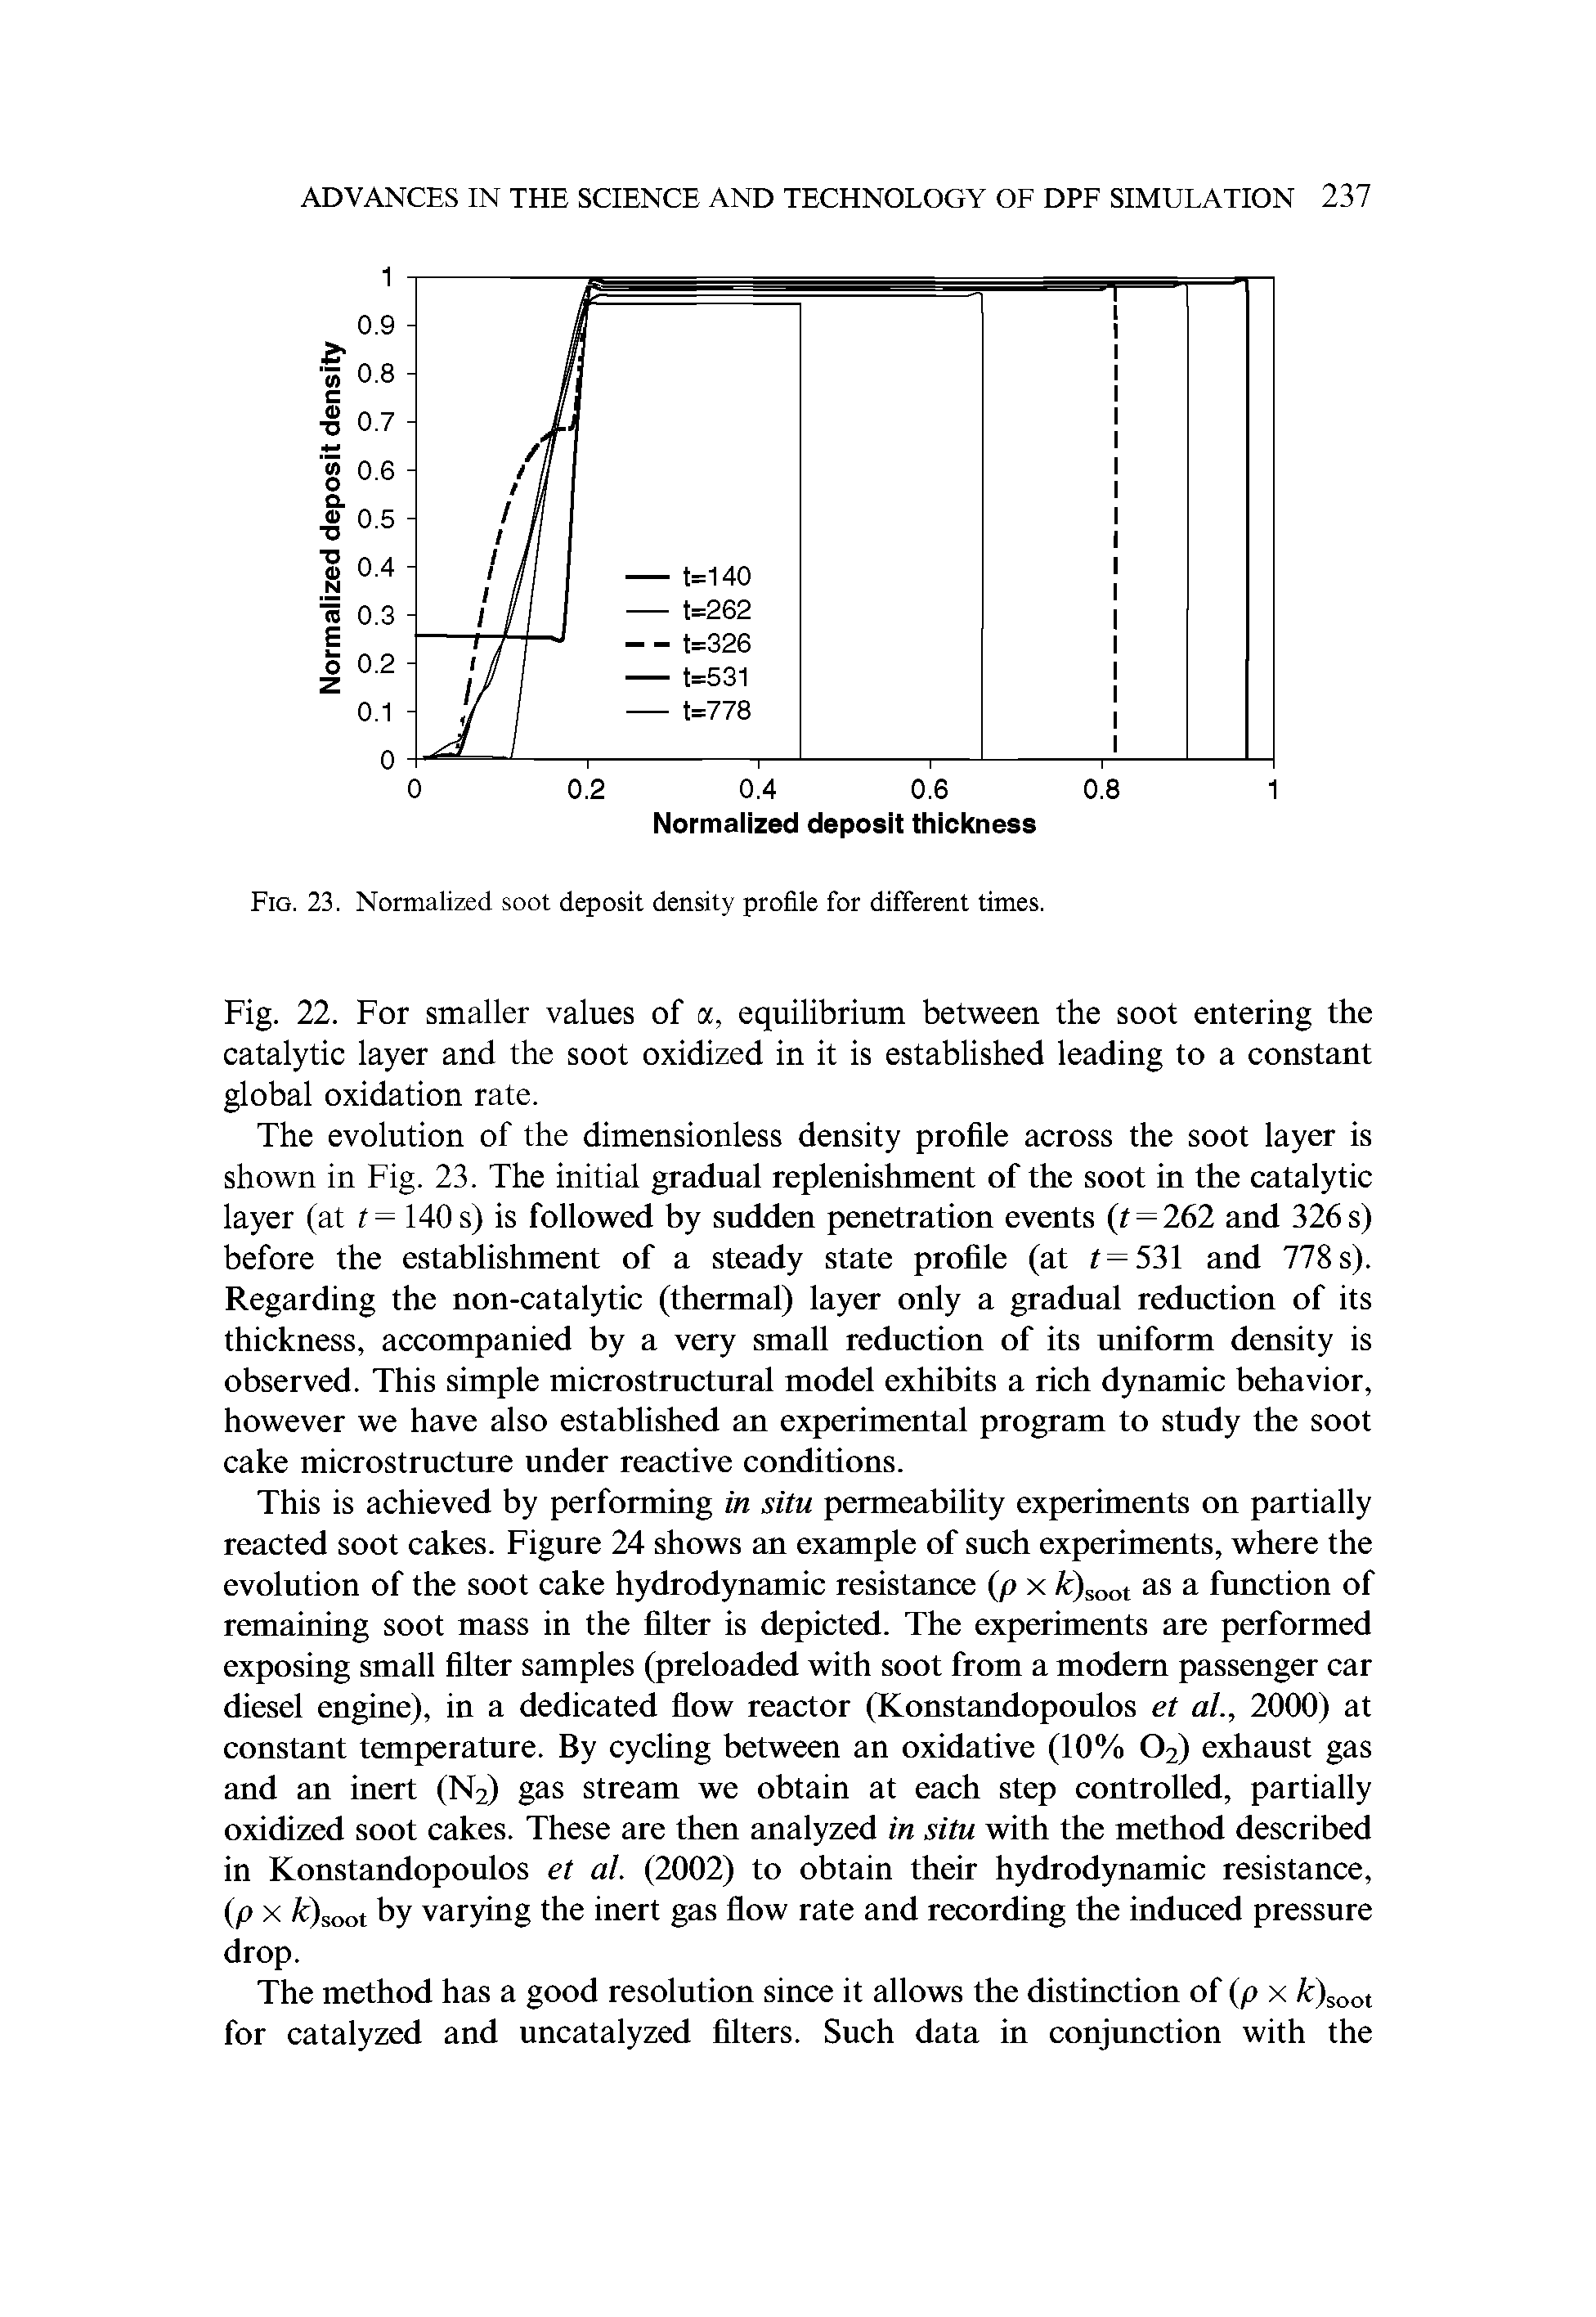 Fig. 22. For smaller values of a, equilibrium between the soot entering the catalytic layer and the soot oxidized in it is established leading to a constant global oxidation rate.